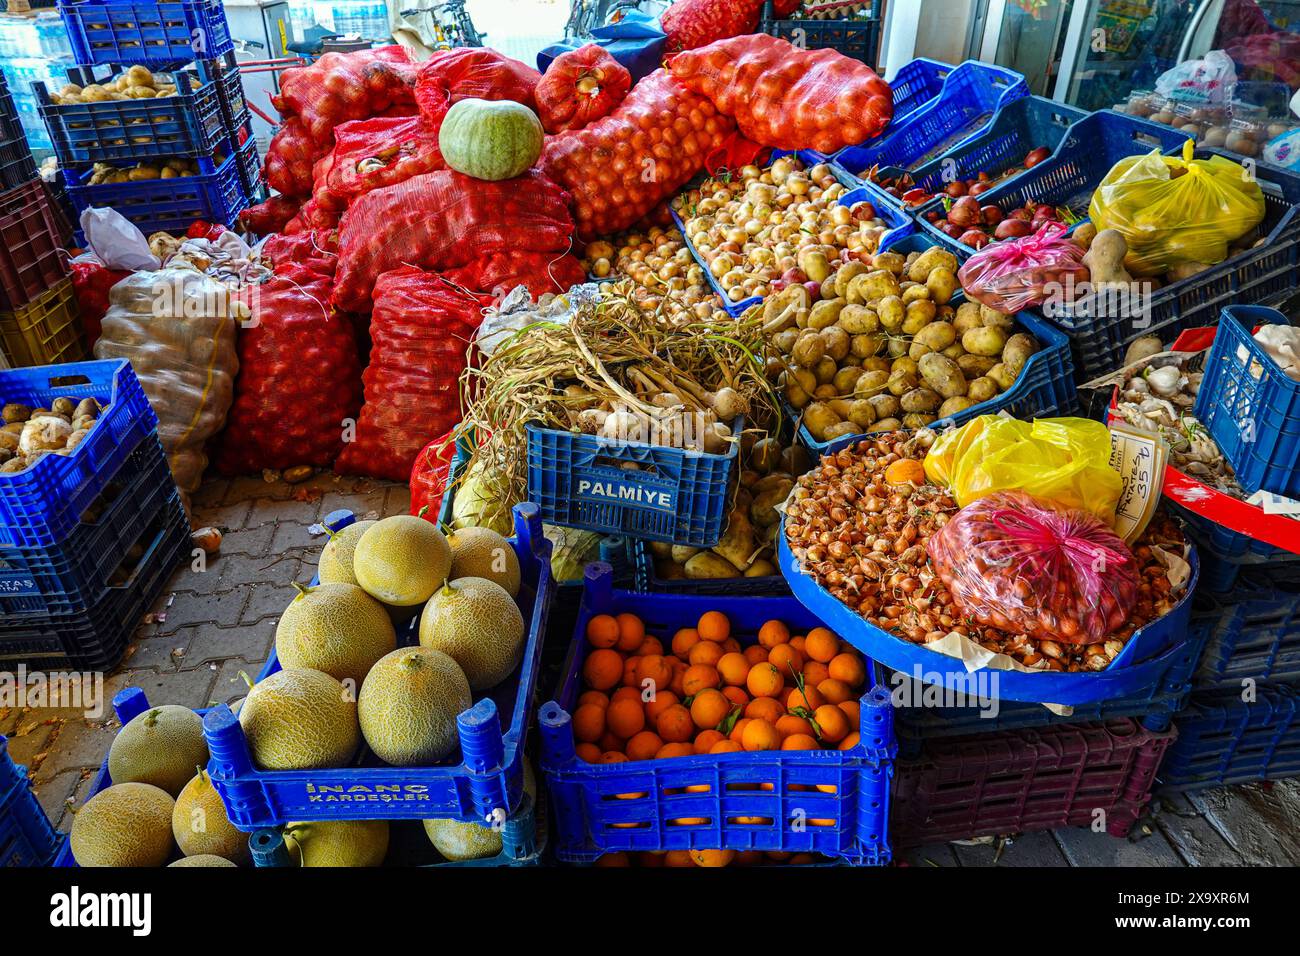 Vegetable shop, greengrocers in Dalyan, Turkey, showing colourful local produce Stock Photo